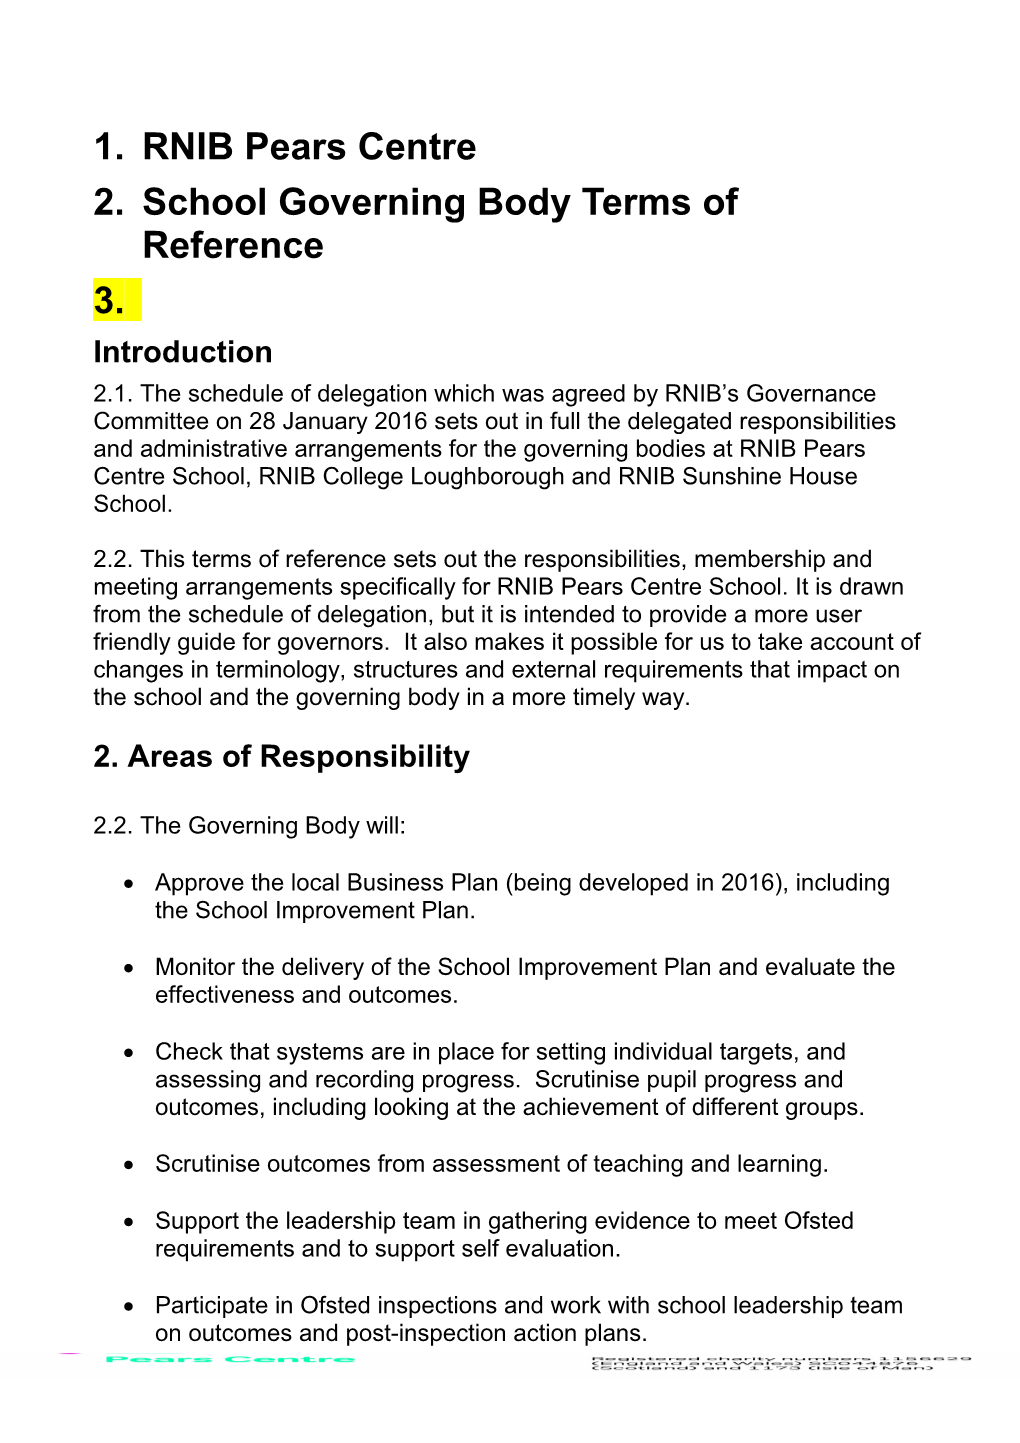 School Governing Body Terms of Reference